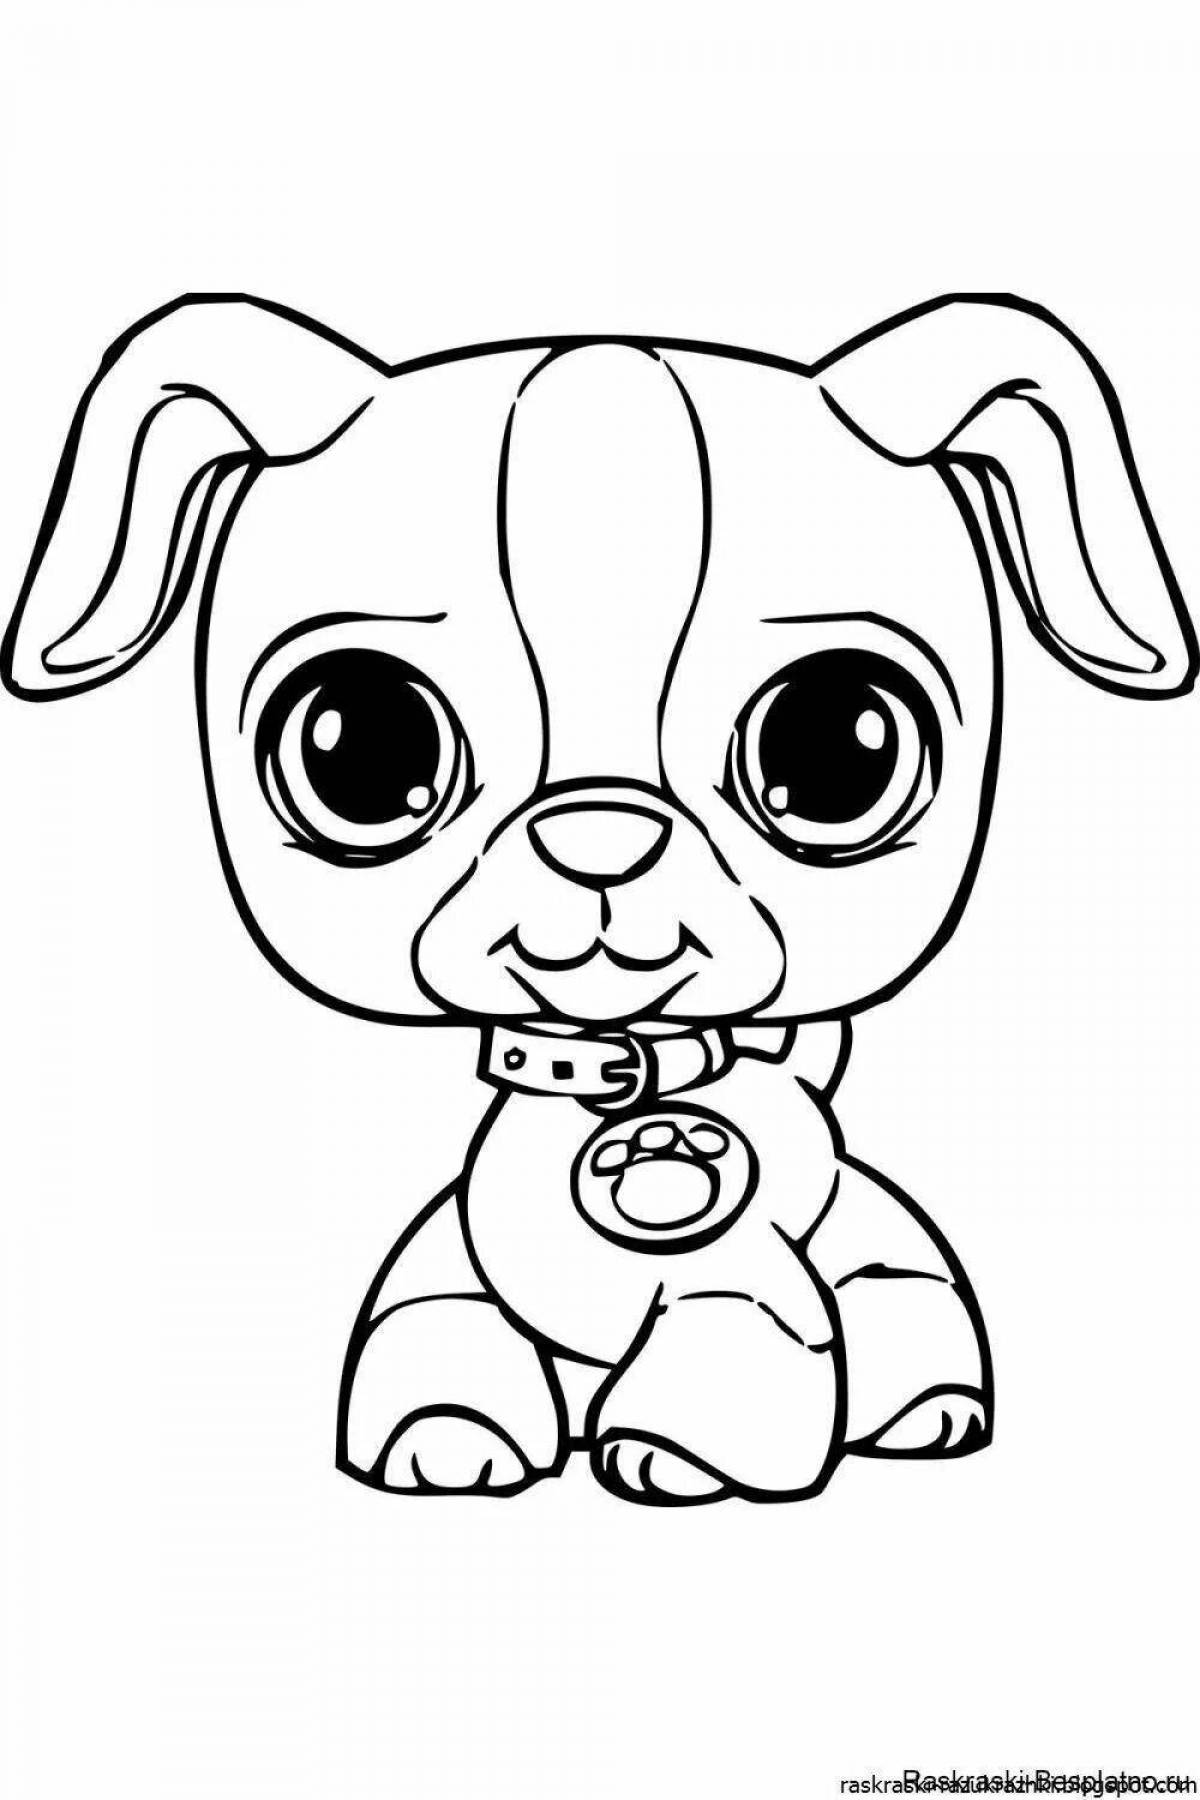 Coloring page naughty cute dog